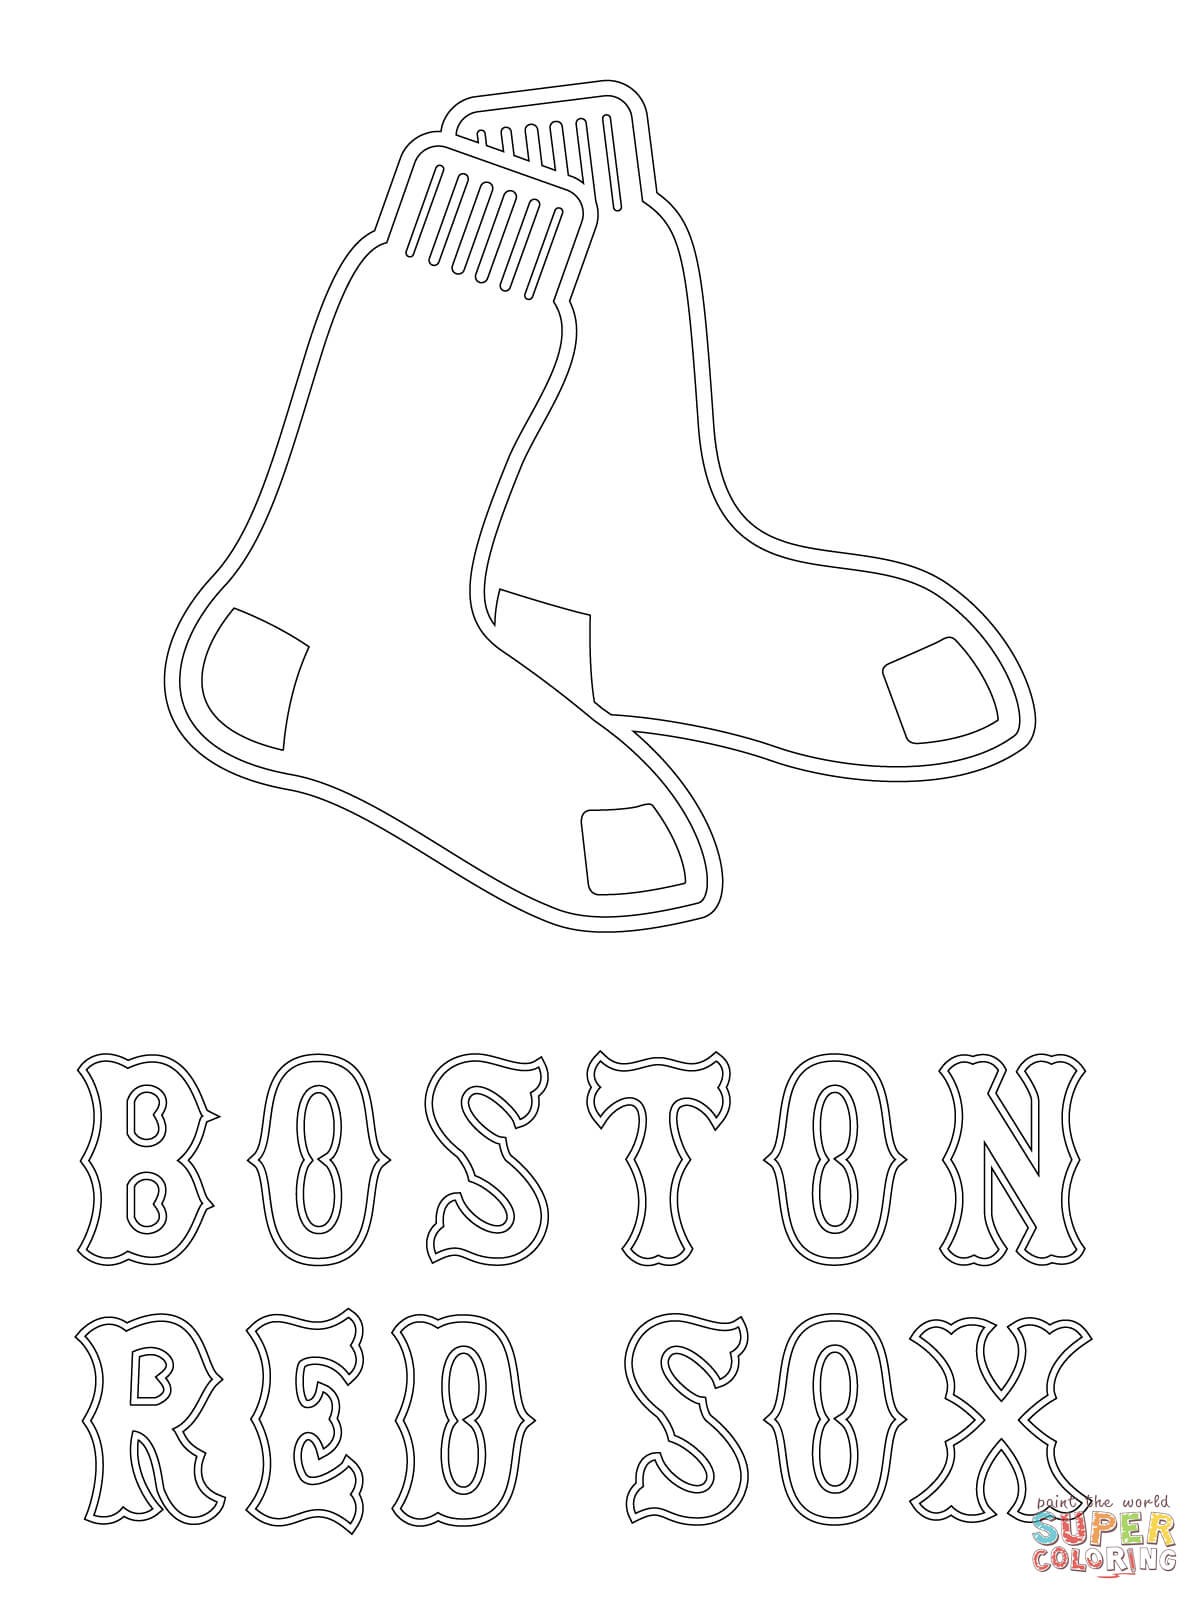 coloring : Baseball Coloring Sheets Best Of Red Soxs Coloring Pages To  Print And Color Coloring Home Baseball Coloring Sheets ~ queens